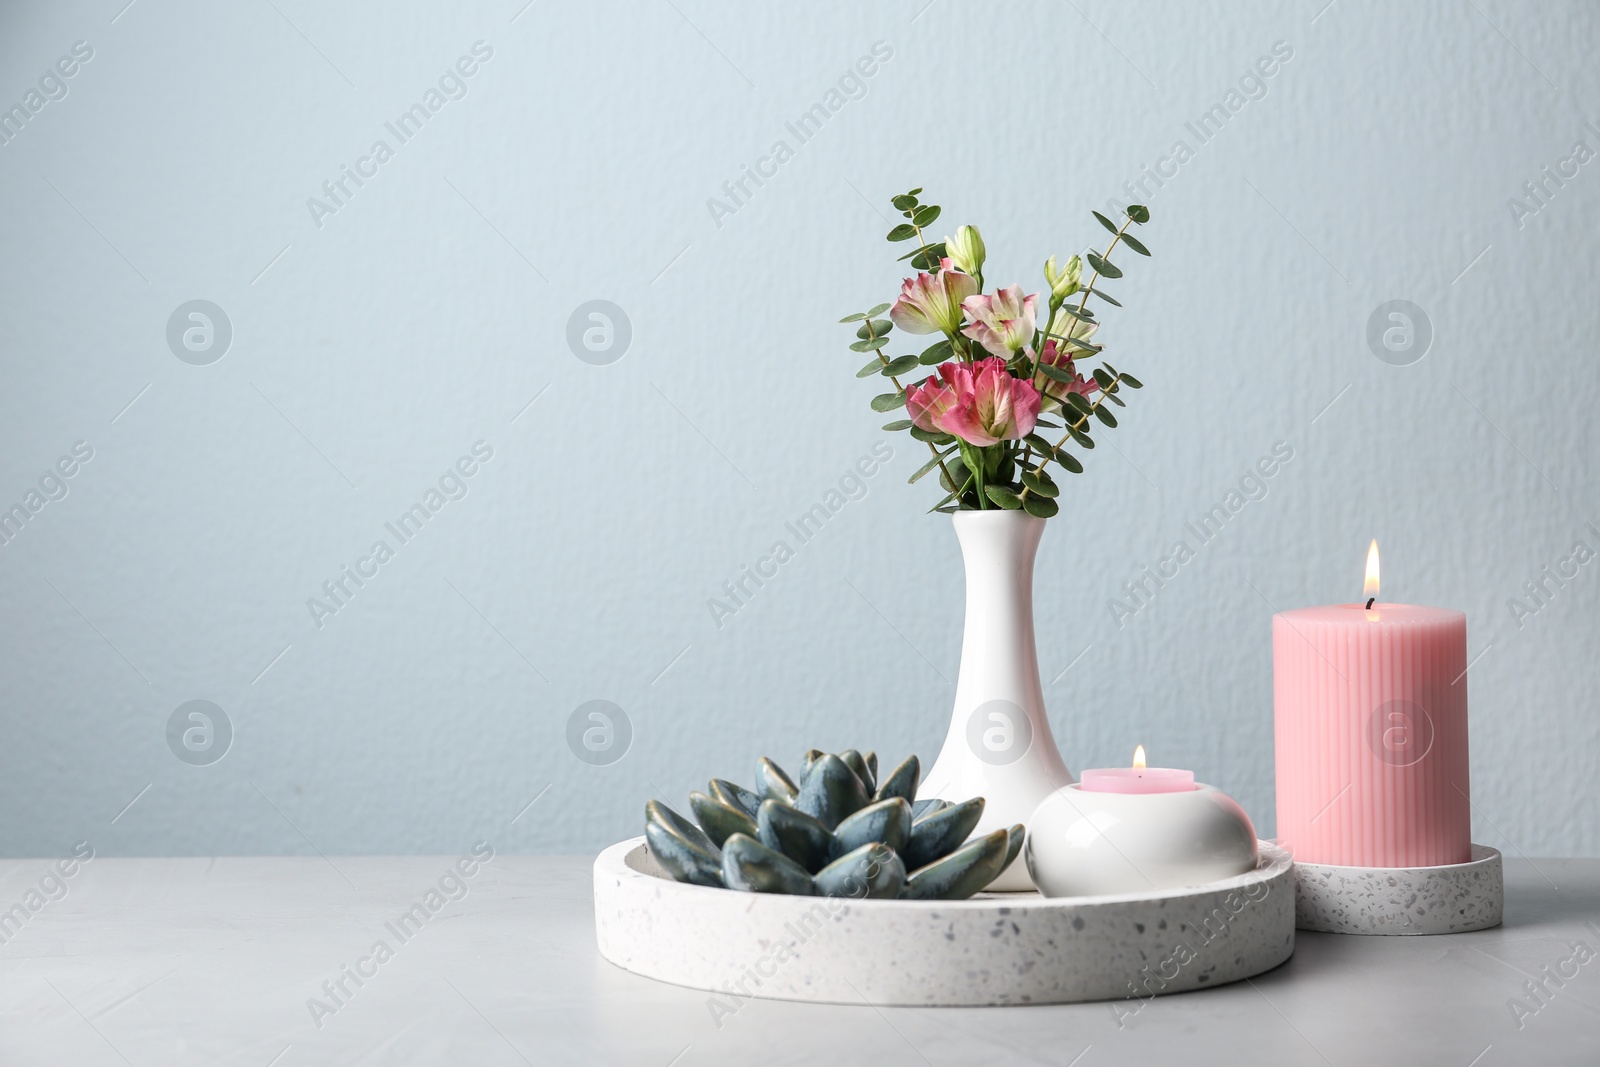 Photo of Stylish tender composition with burning candles and flowers on white table against light background, space for text. Cozy interior element